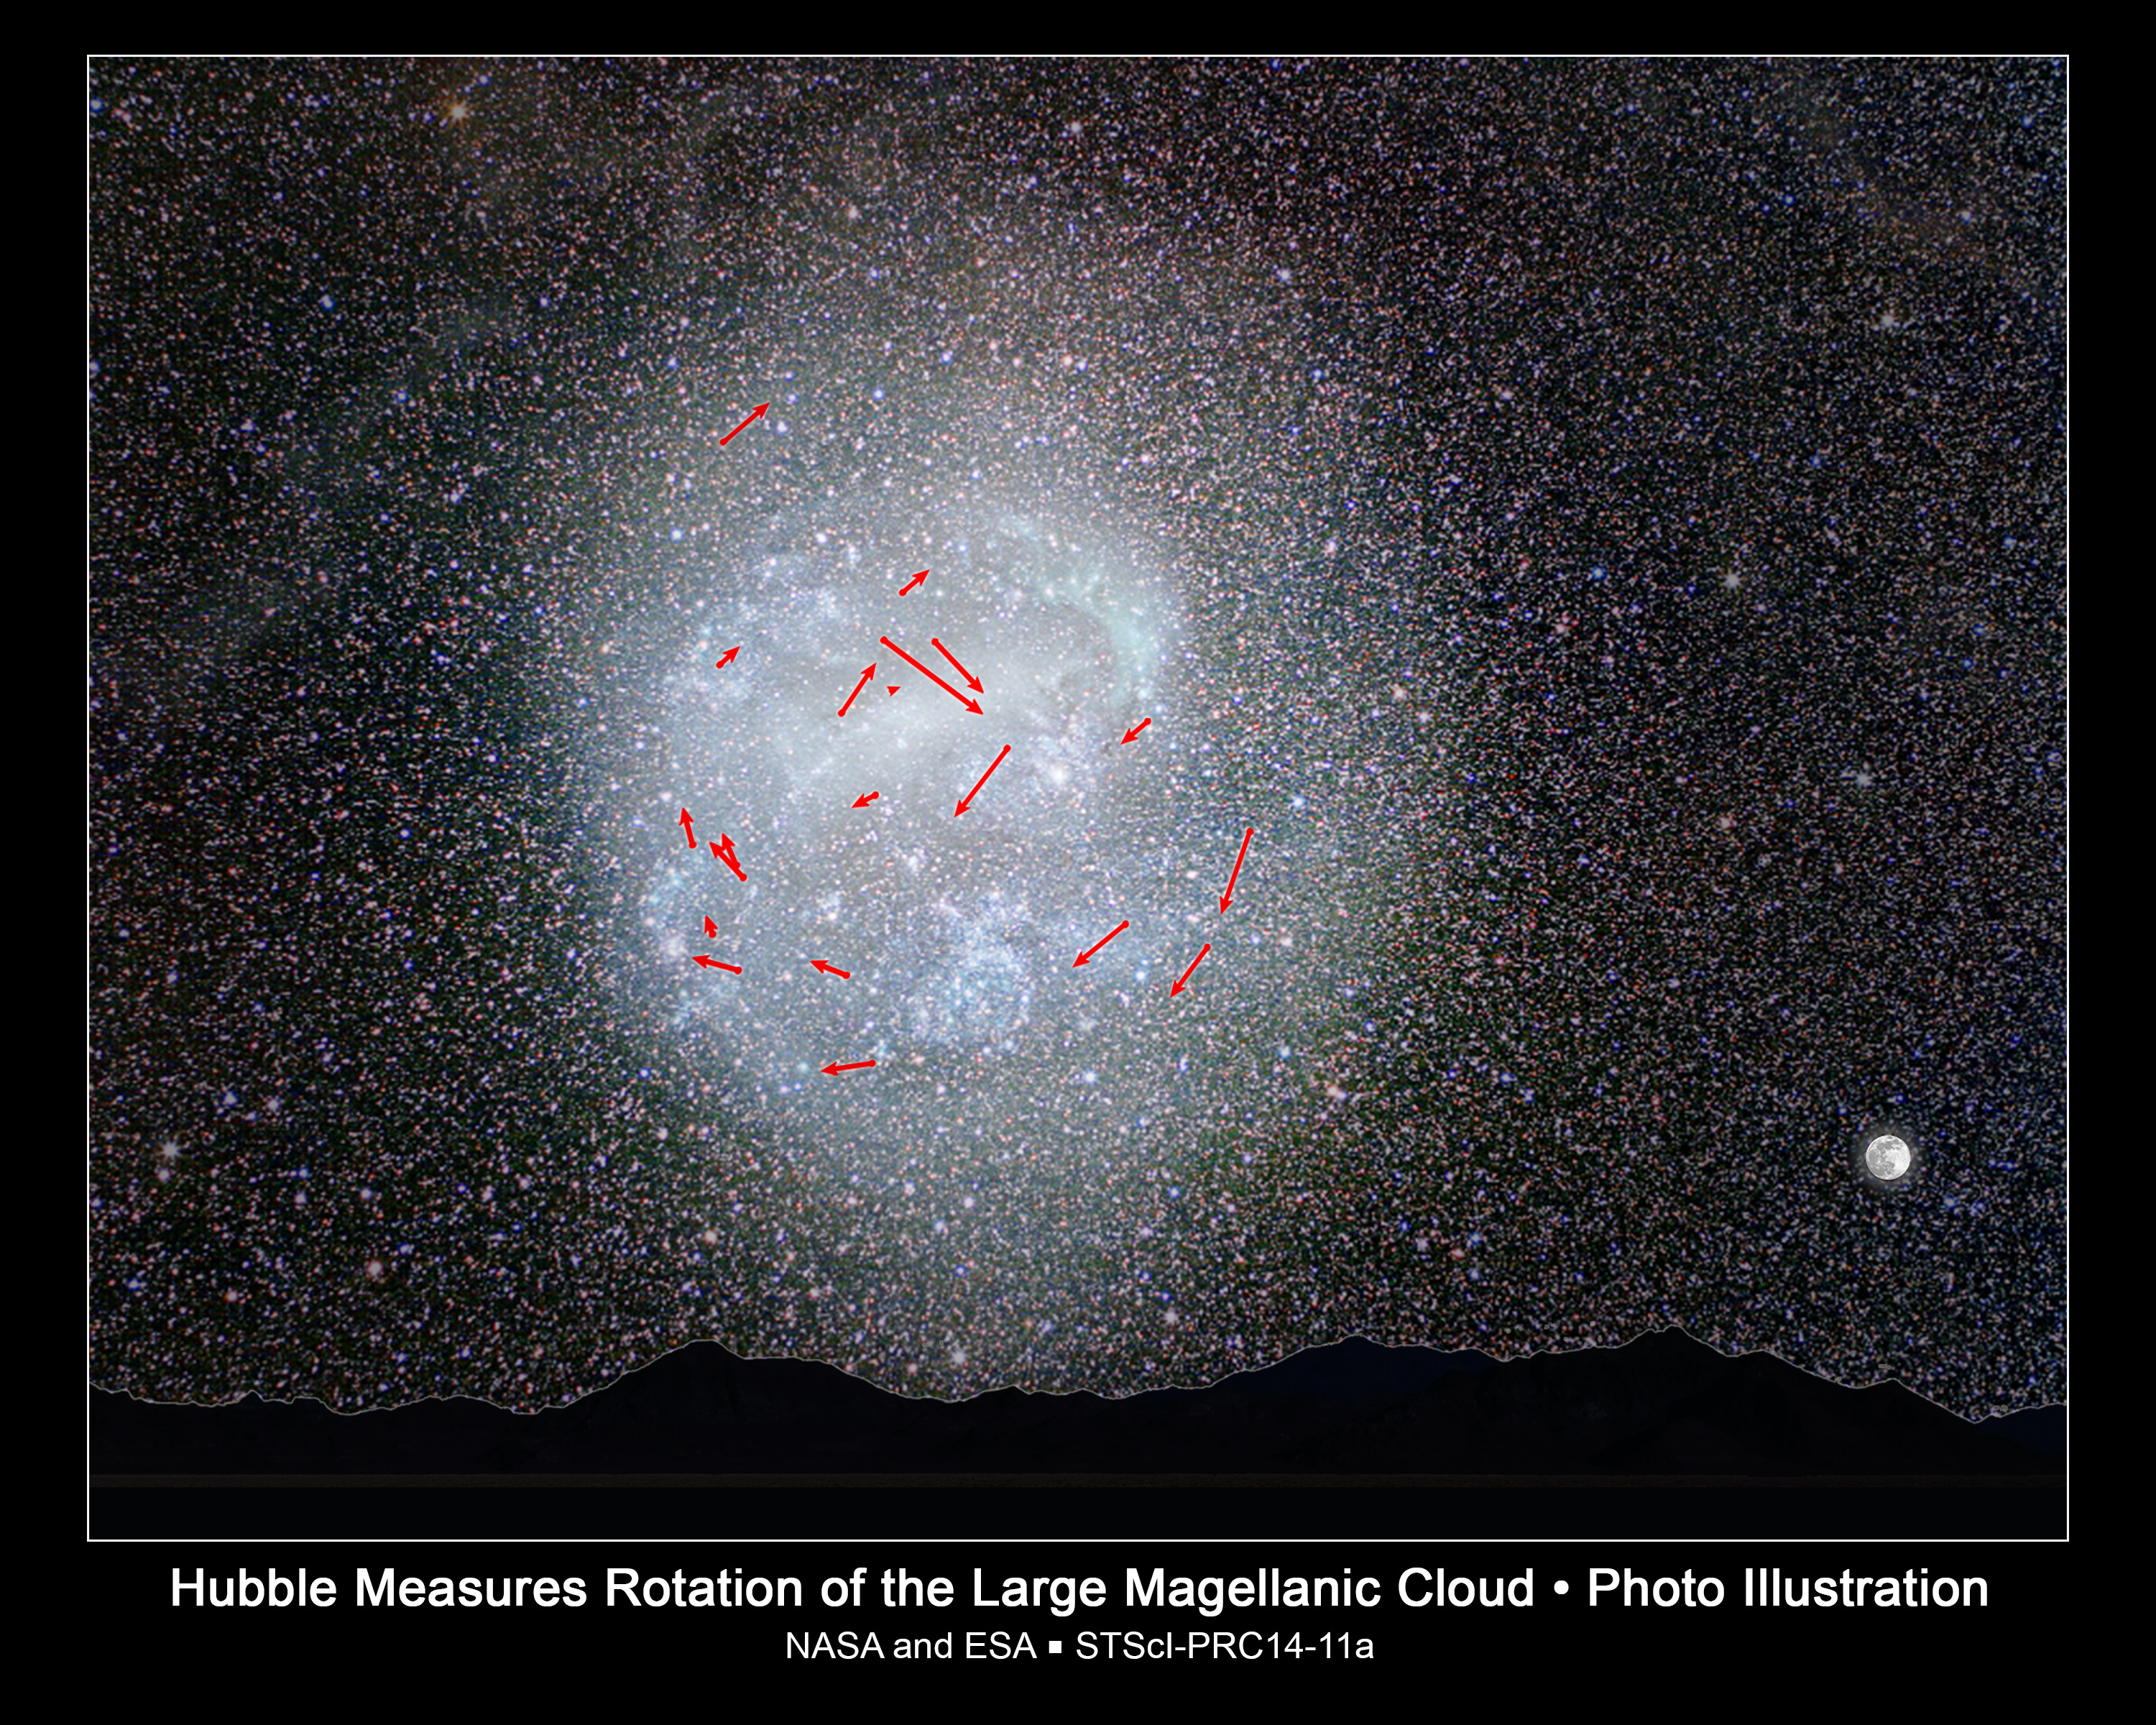 February 18, 2014: Using the sharp-eyed NASA Hubble Space Telescope, astronomers have for the first time precisely measured the rotation rate of a galaxy based on the clock-like movement of its stars. According to their analysis, the central part of the neighboring galaxy, called the Large Magellanic Cloud (LMC), completes a rotation every 250 million years. Coincidentally, it takes our Sun the same amount of time to complete a rotation around the center of our Milky Way galaxy. The arrows in this photo illustration represent the highest-quality Hubble measurements of the motion of the LMC's stars to show how the galaxy rotates.